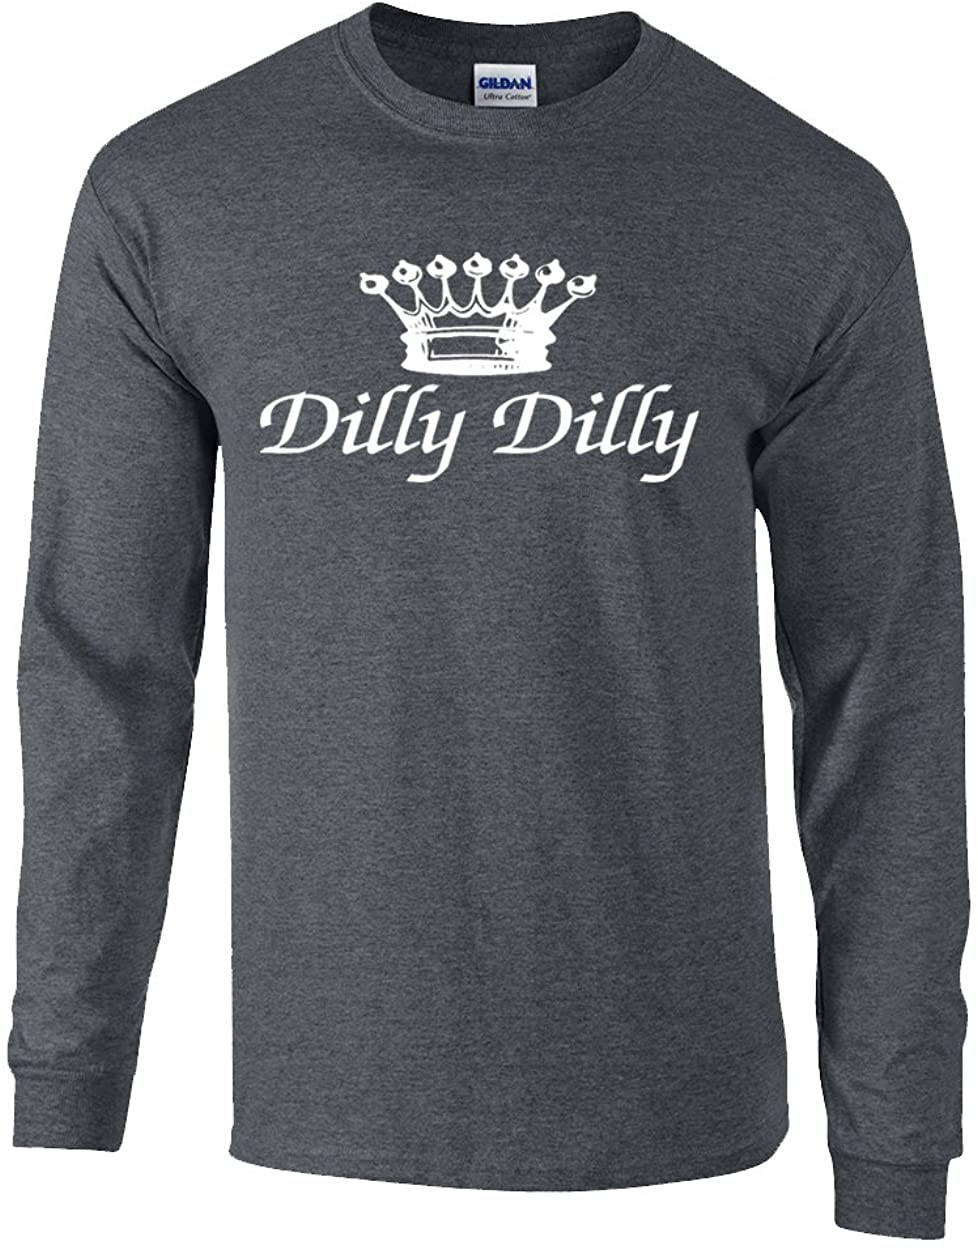 Funny Beer Drinking Dilly Dilly Script T-Shirt